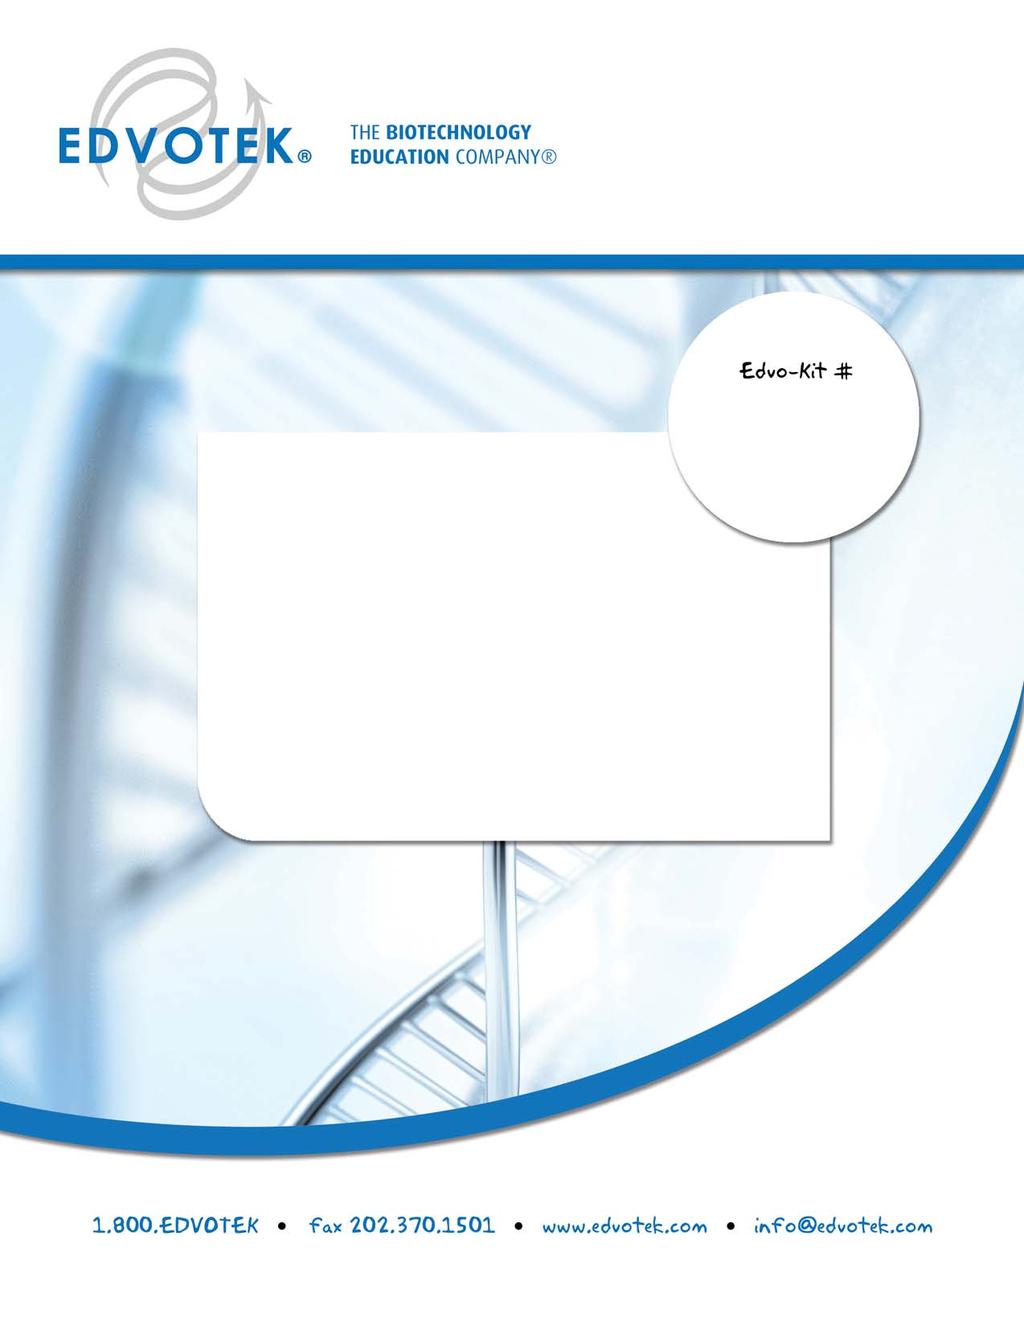 NEW Edvo-Kit #S-54 What is qpcr and How Does It Work?